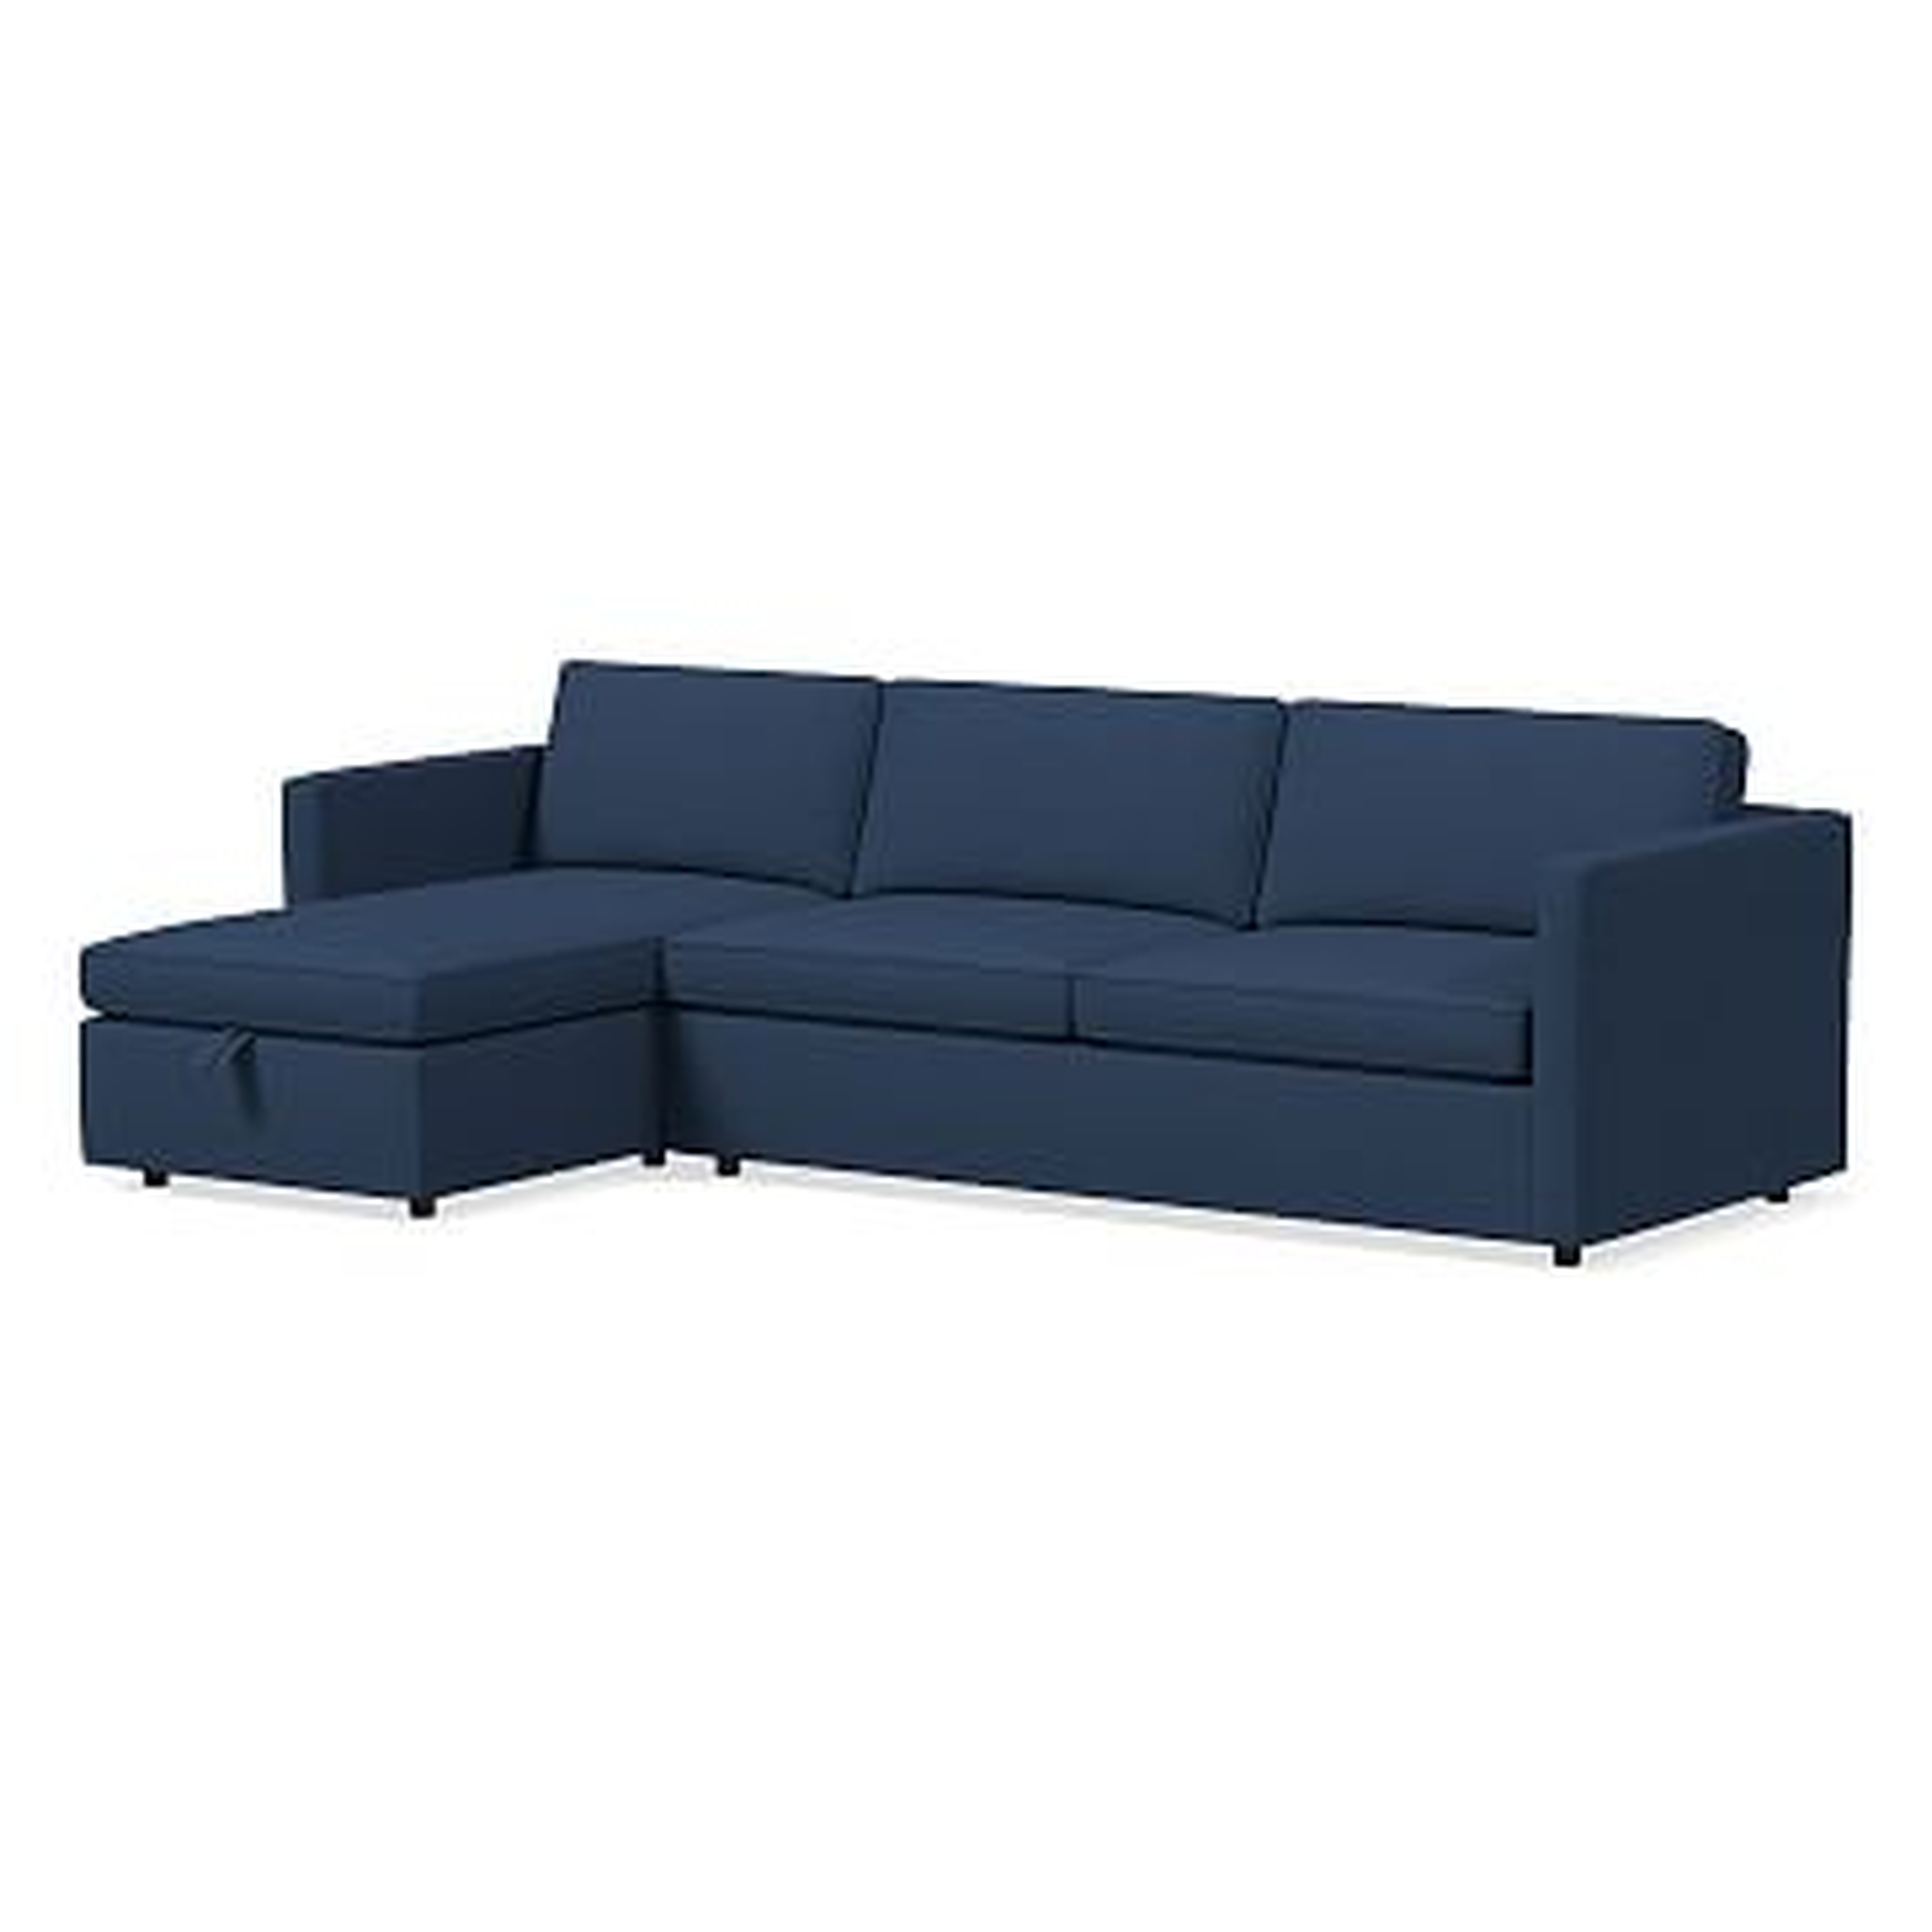 Harris Sectional Set 04: Right Arm Sleeper Sofa, Left Arm Storage Chaise, Poly, Classic Cotton, Ink, Concealed Support - West Elm